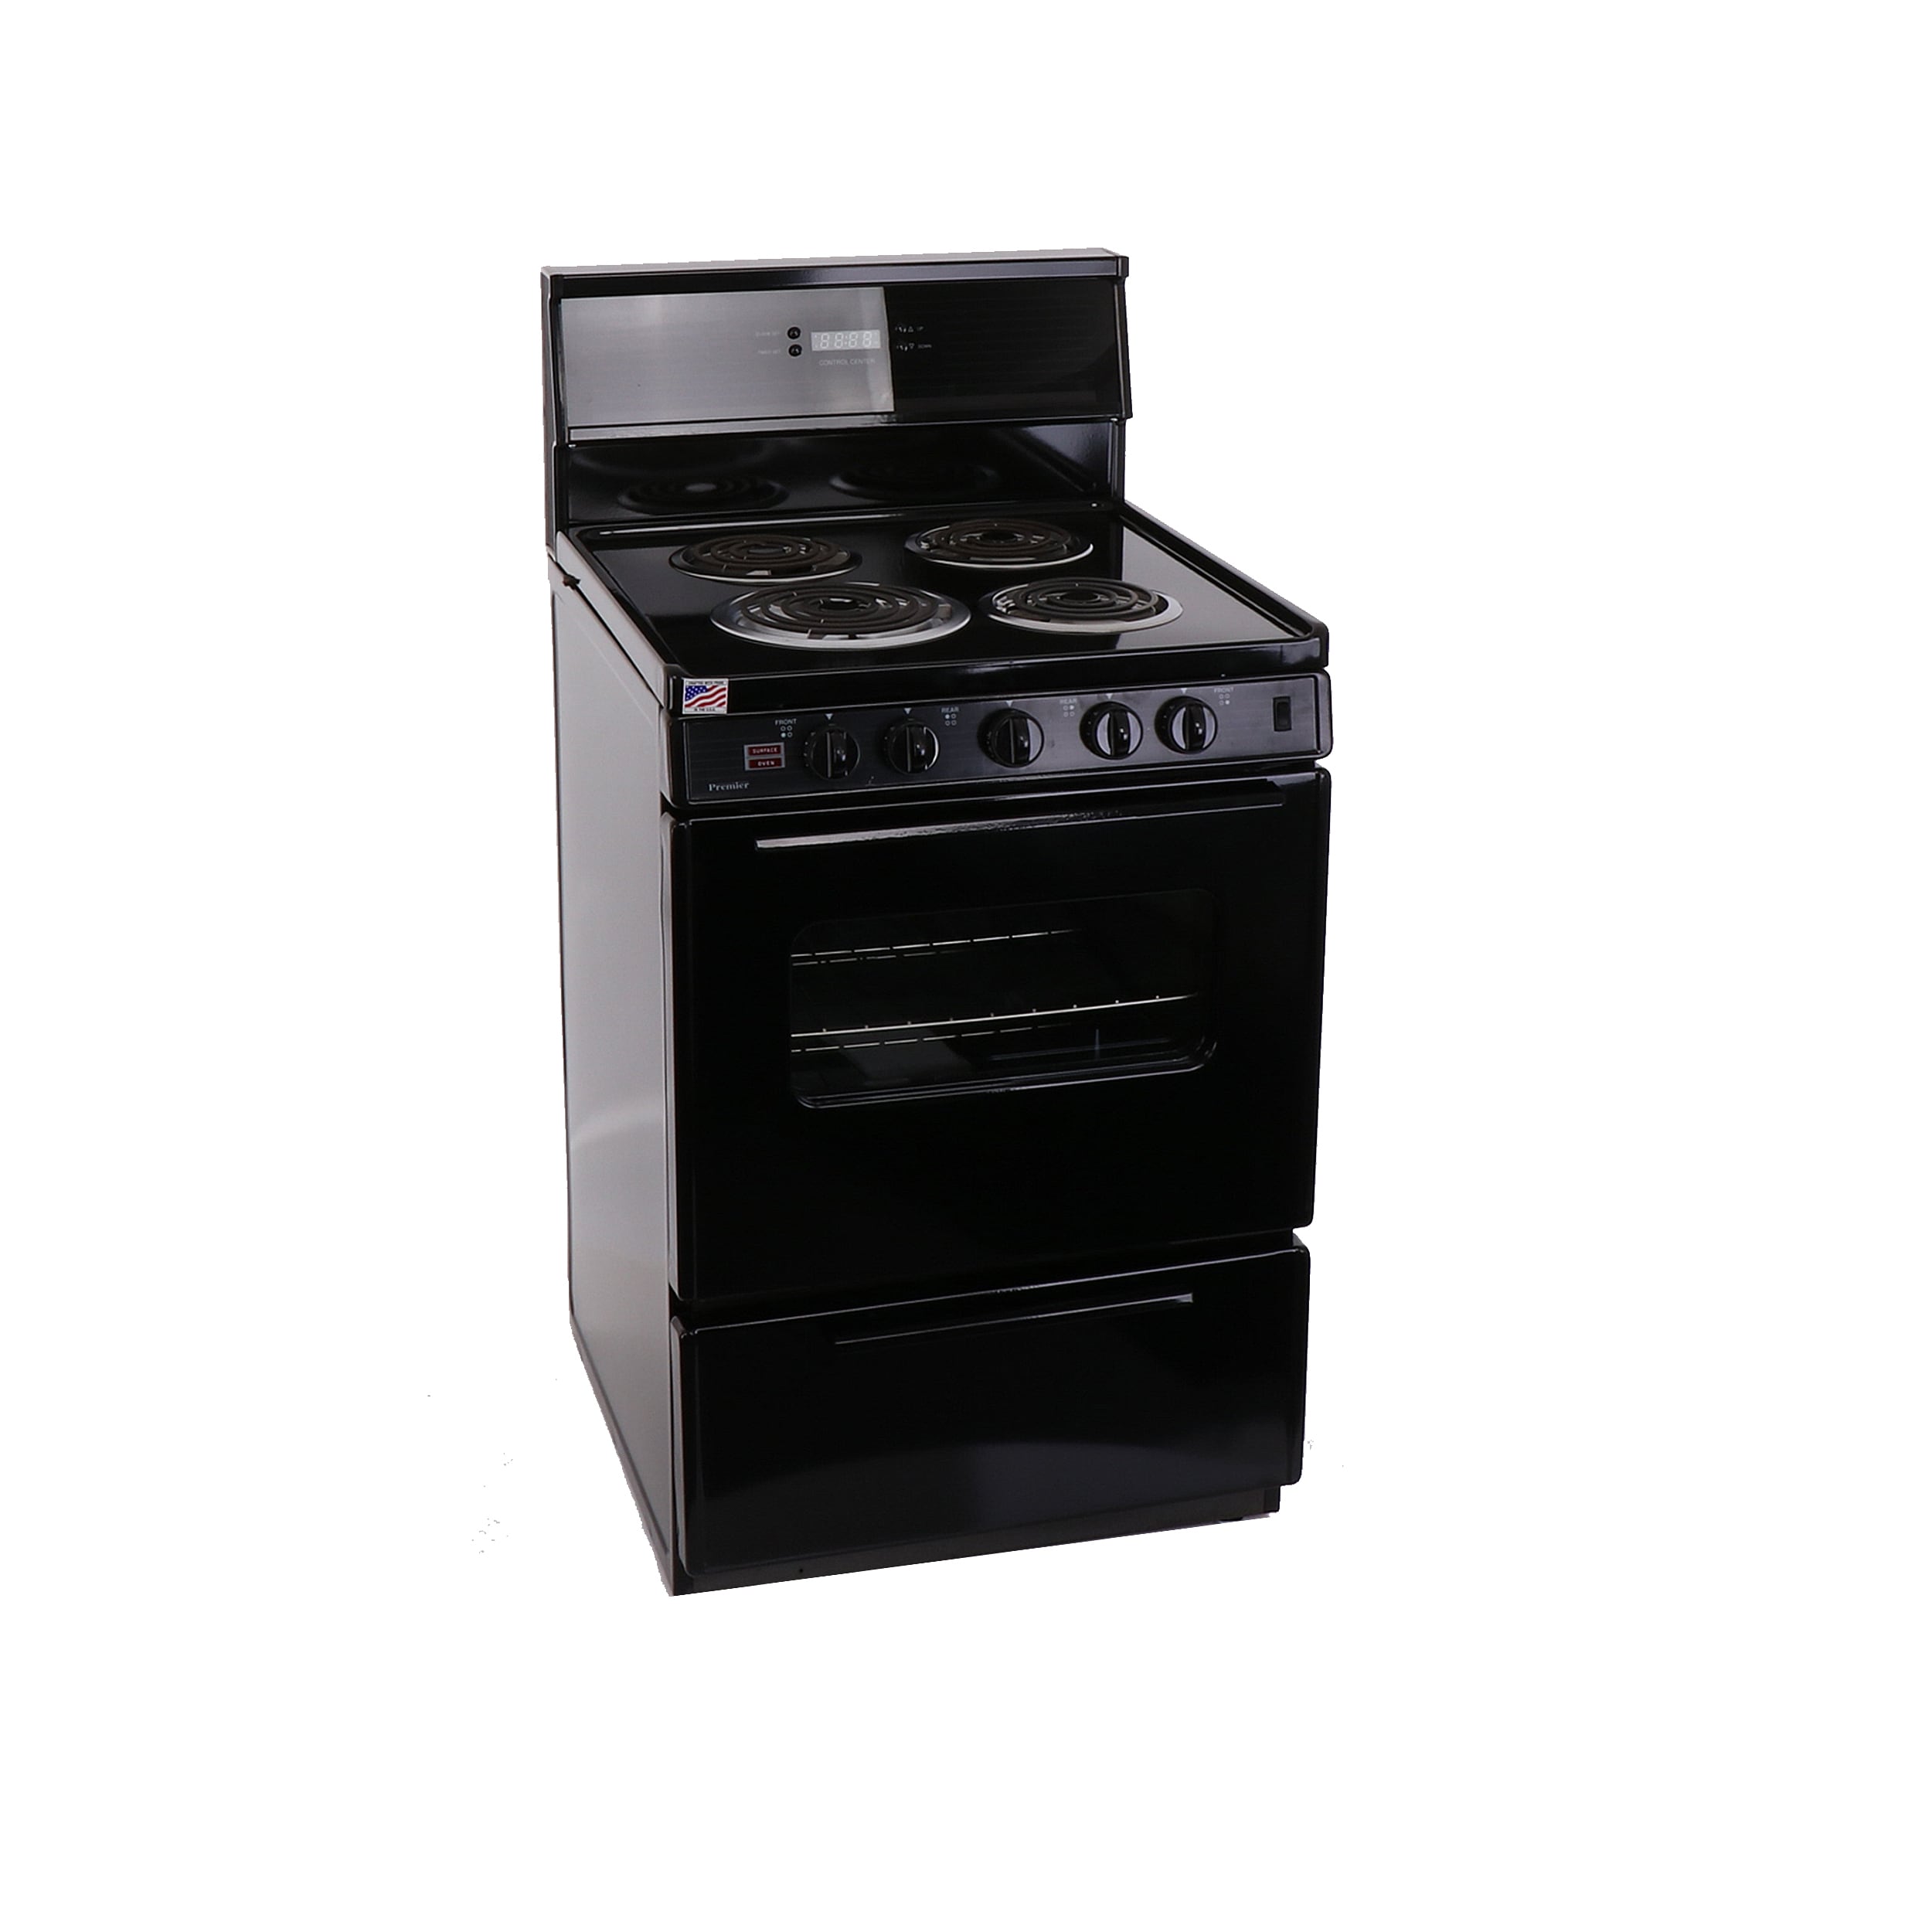 Premier ECK240BP 24 Inch Freestanding Electric Range with 4 Coil Elements,  2.9 cu. ft. Capacity, 2 Adjustable Oven Racks, Lift-Up Top, Electronic